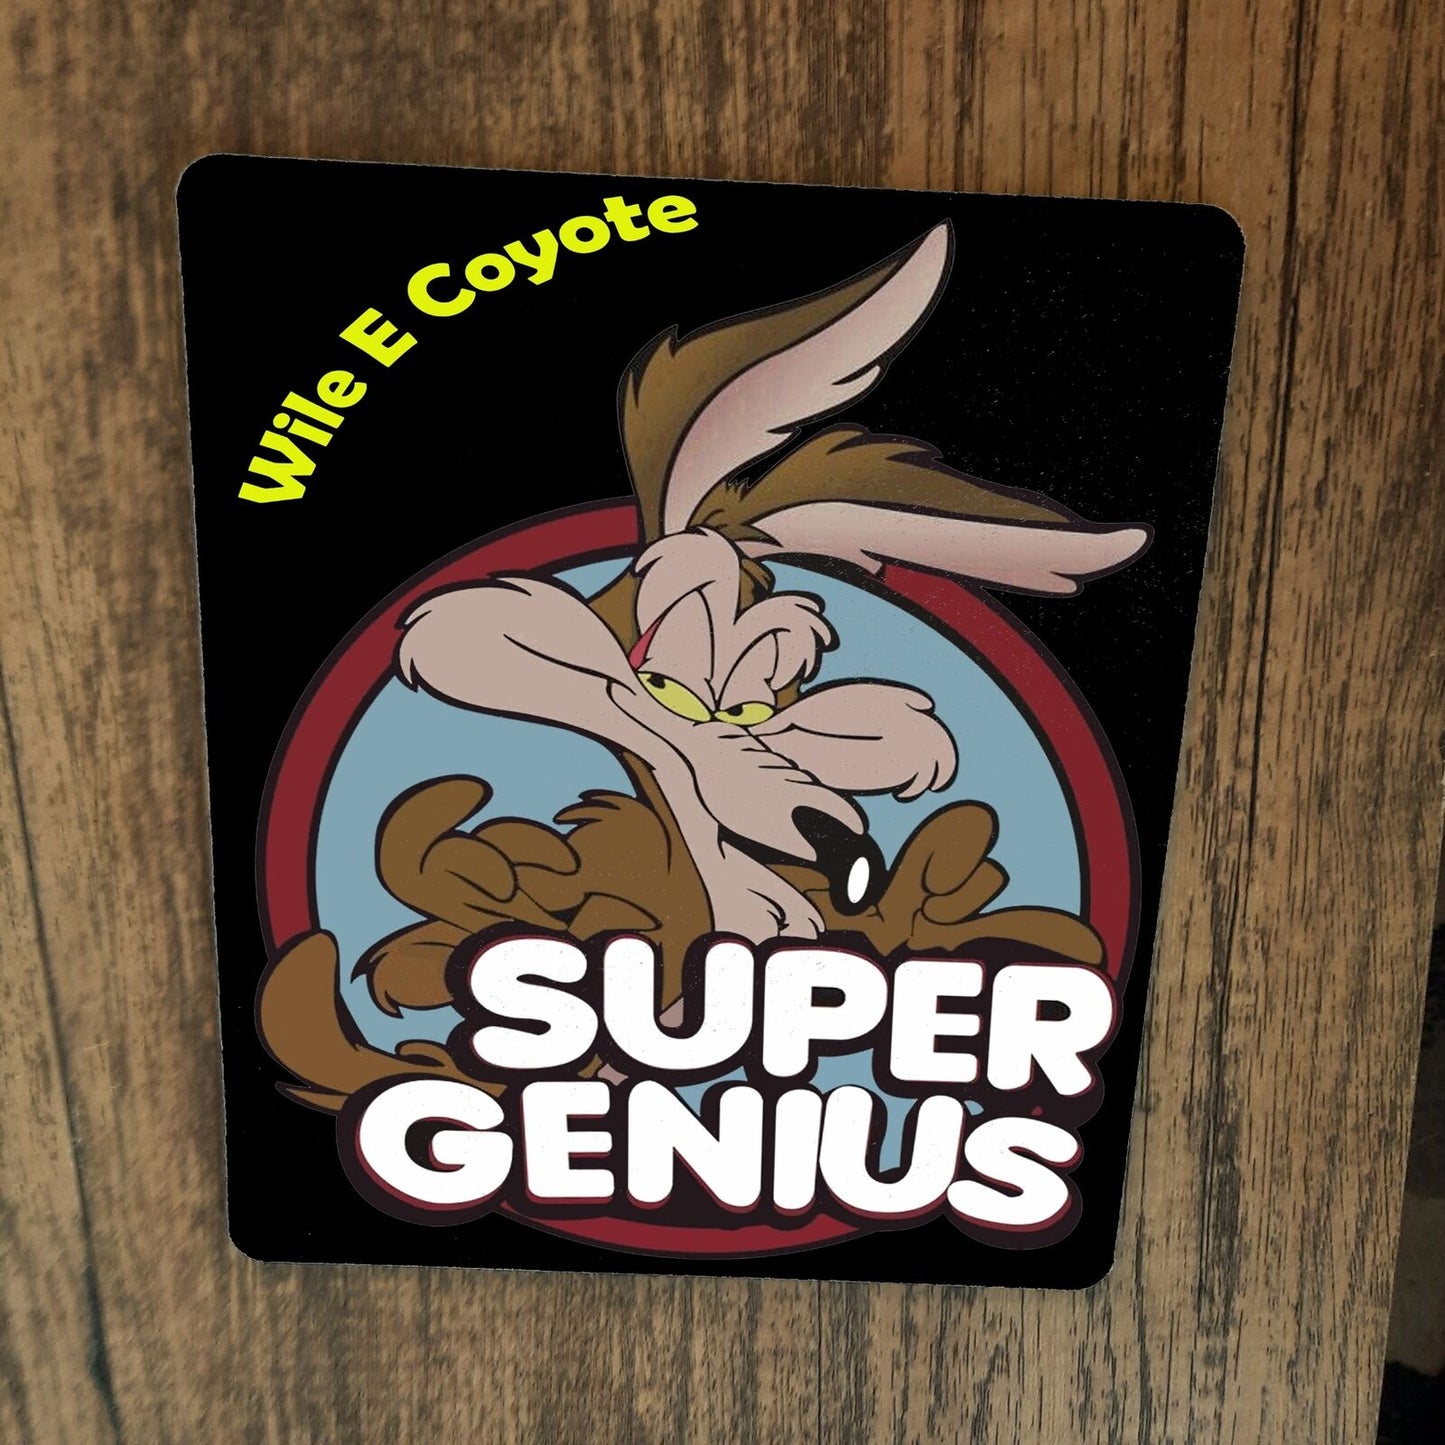 Wile E Coyote Super Genius Classic Cartoon Looney Tunes Mouse Pad – Sign  Junky